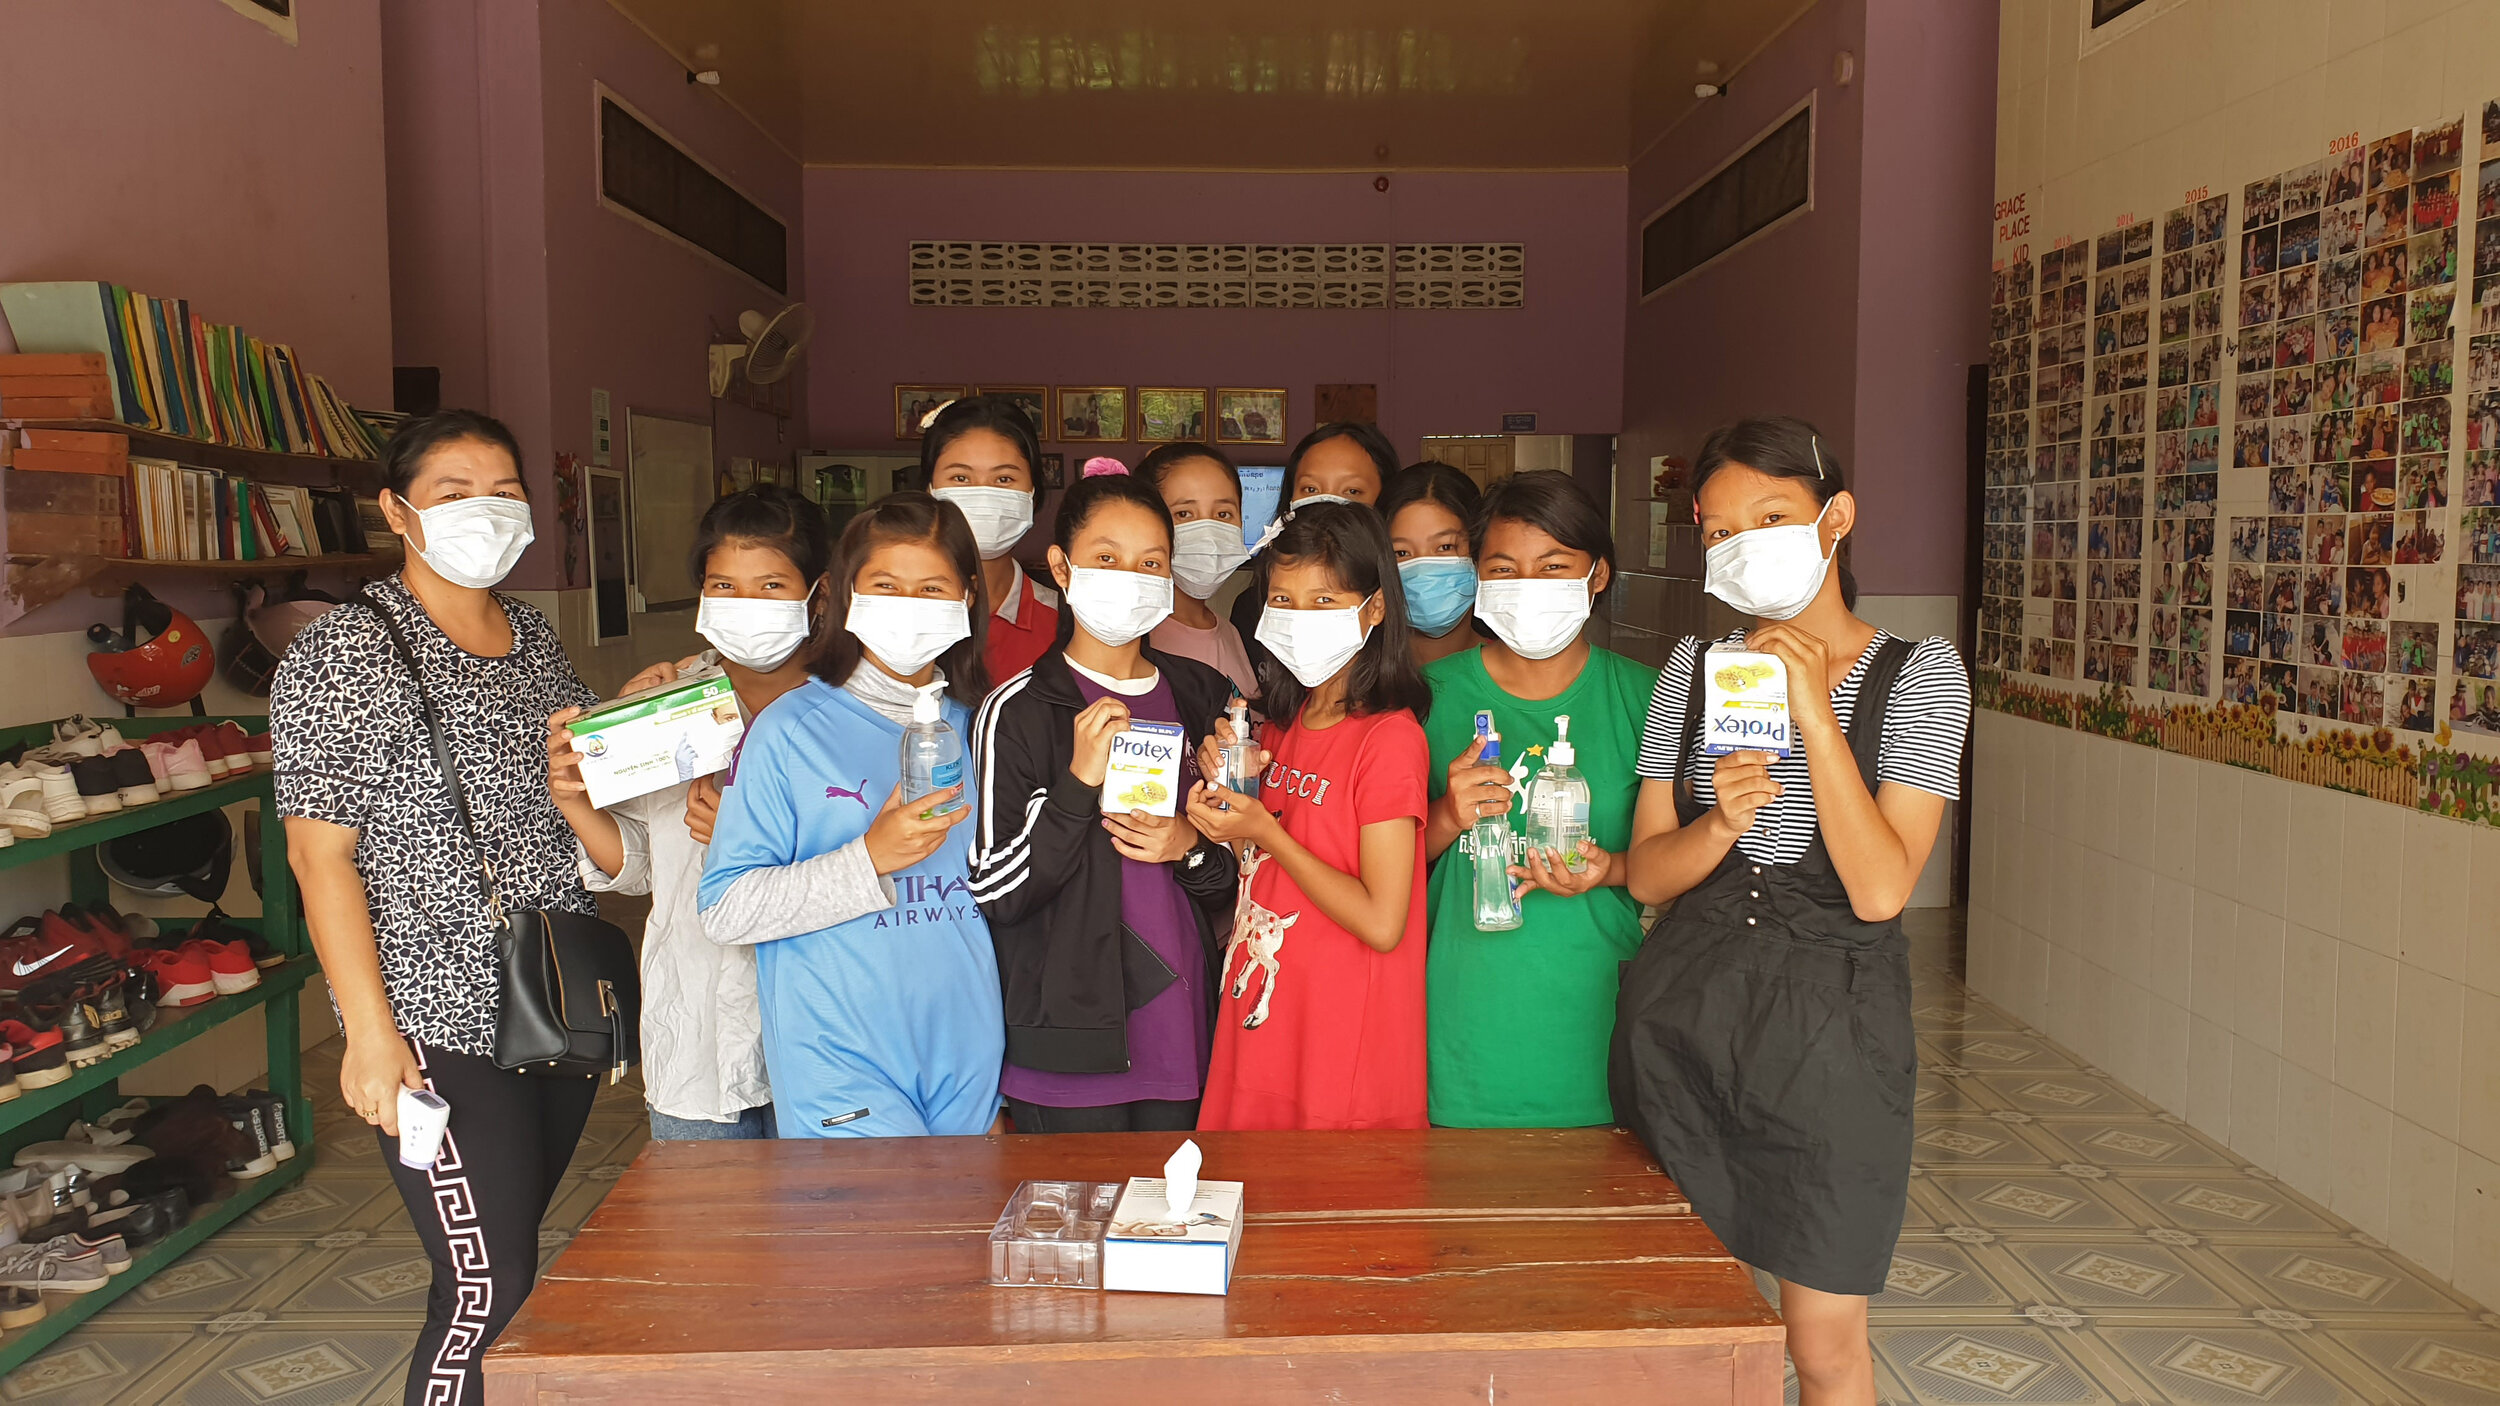  These young women in Battambang, Cambodia are taking all of the proper precautions to keep themselves and their family members safe! 